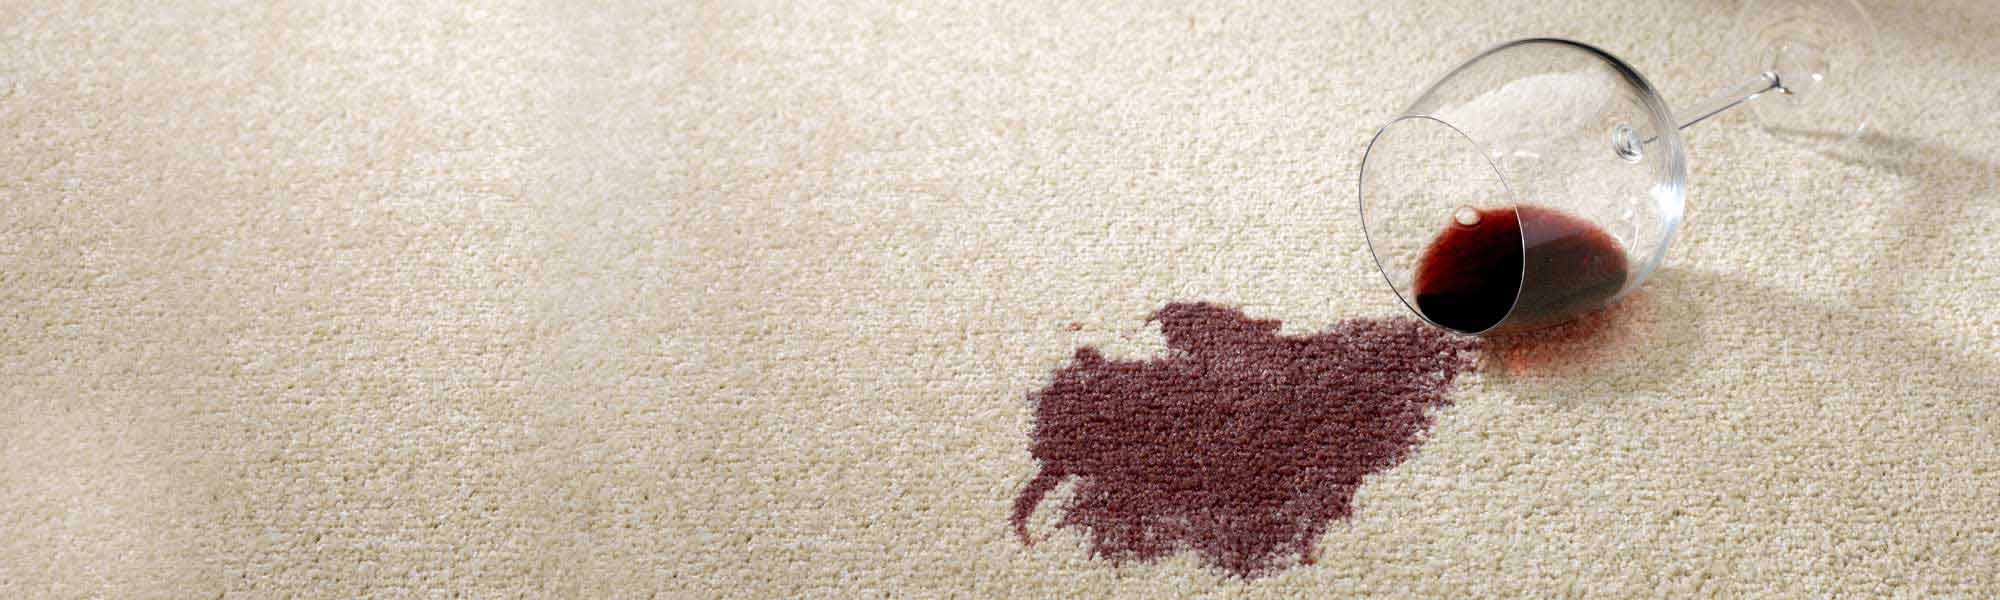 Professional Stain Removal Service by Peninsula Chem-Dry